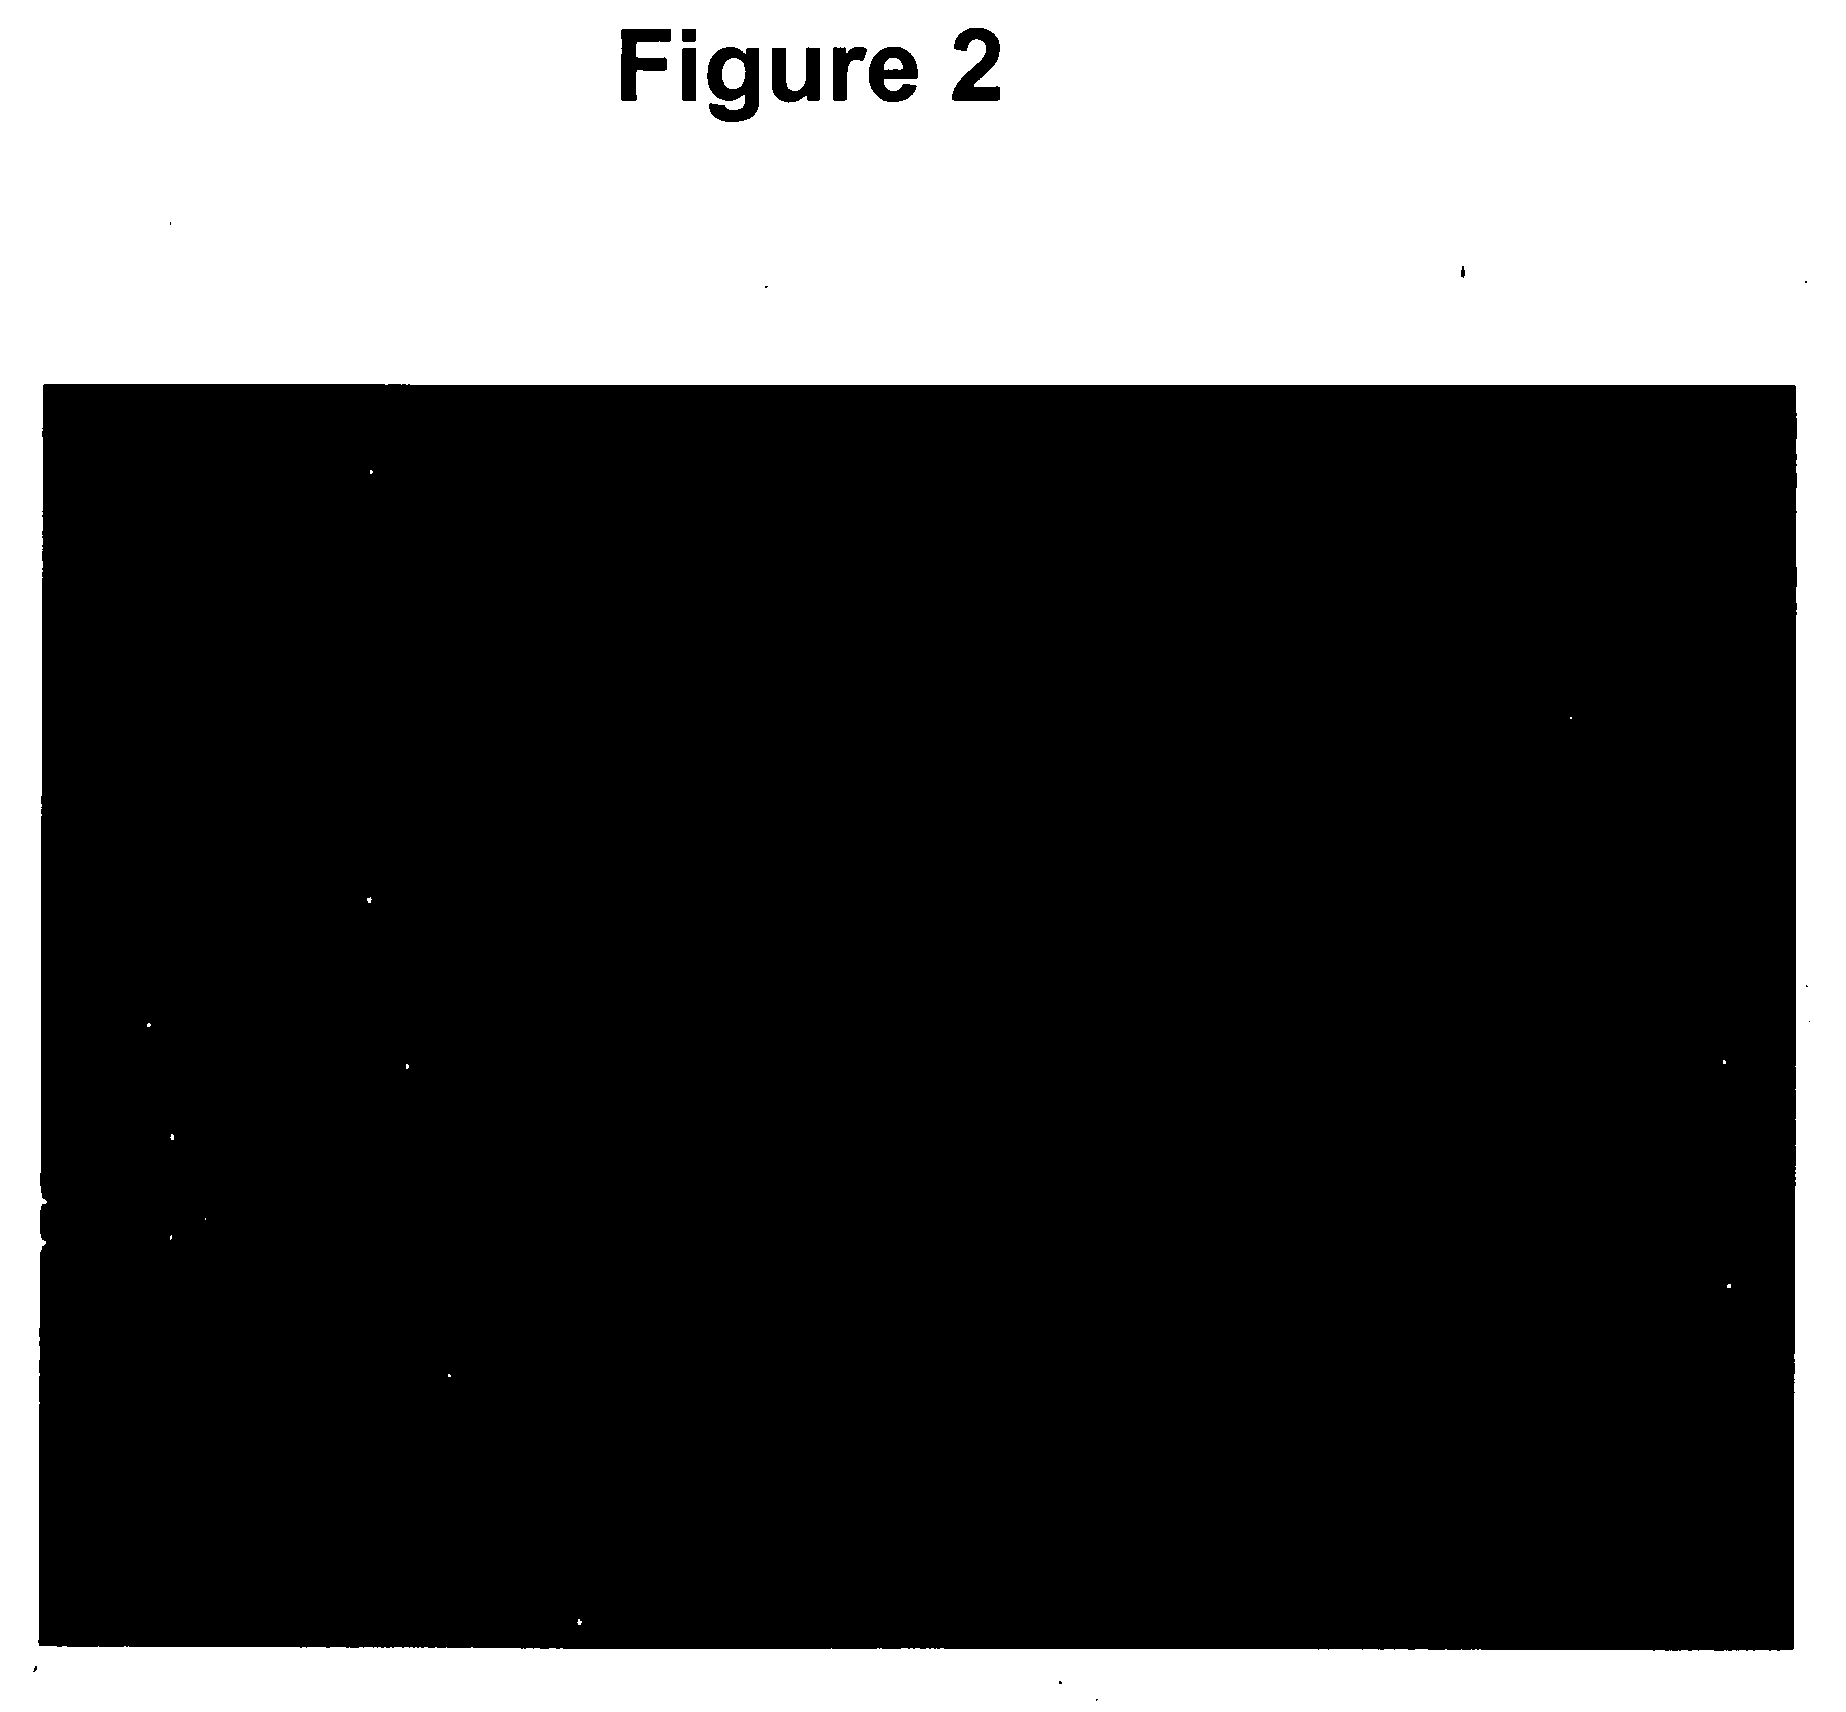 System and method for assessing motor and locomotor deficits and recovery therefrom